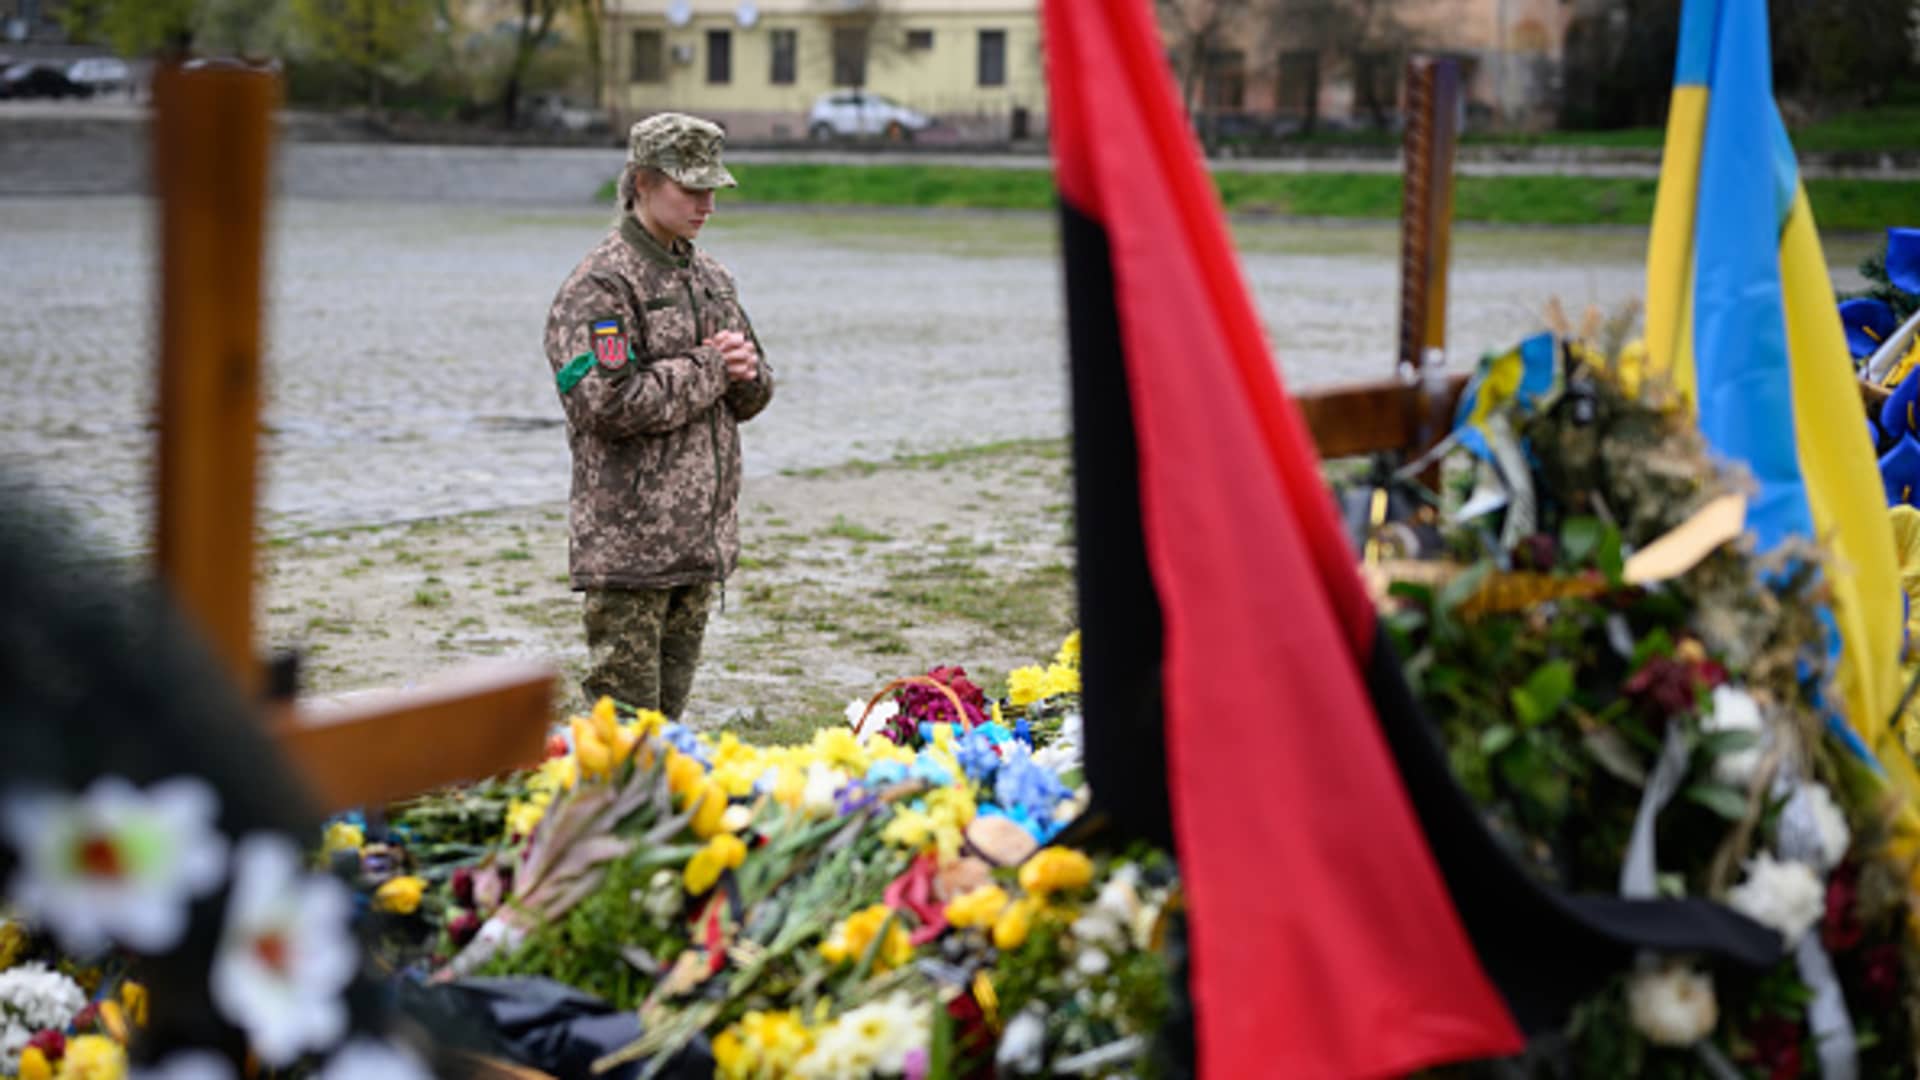 A woman pays her respects at the grave of a fallen soldier in the Field of Mars at Lychakiv cemetery, on April 26, 2022 in Lviv, Ukraine.